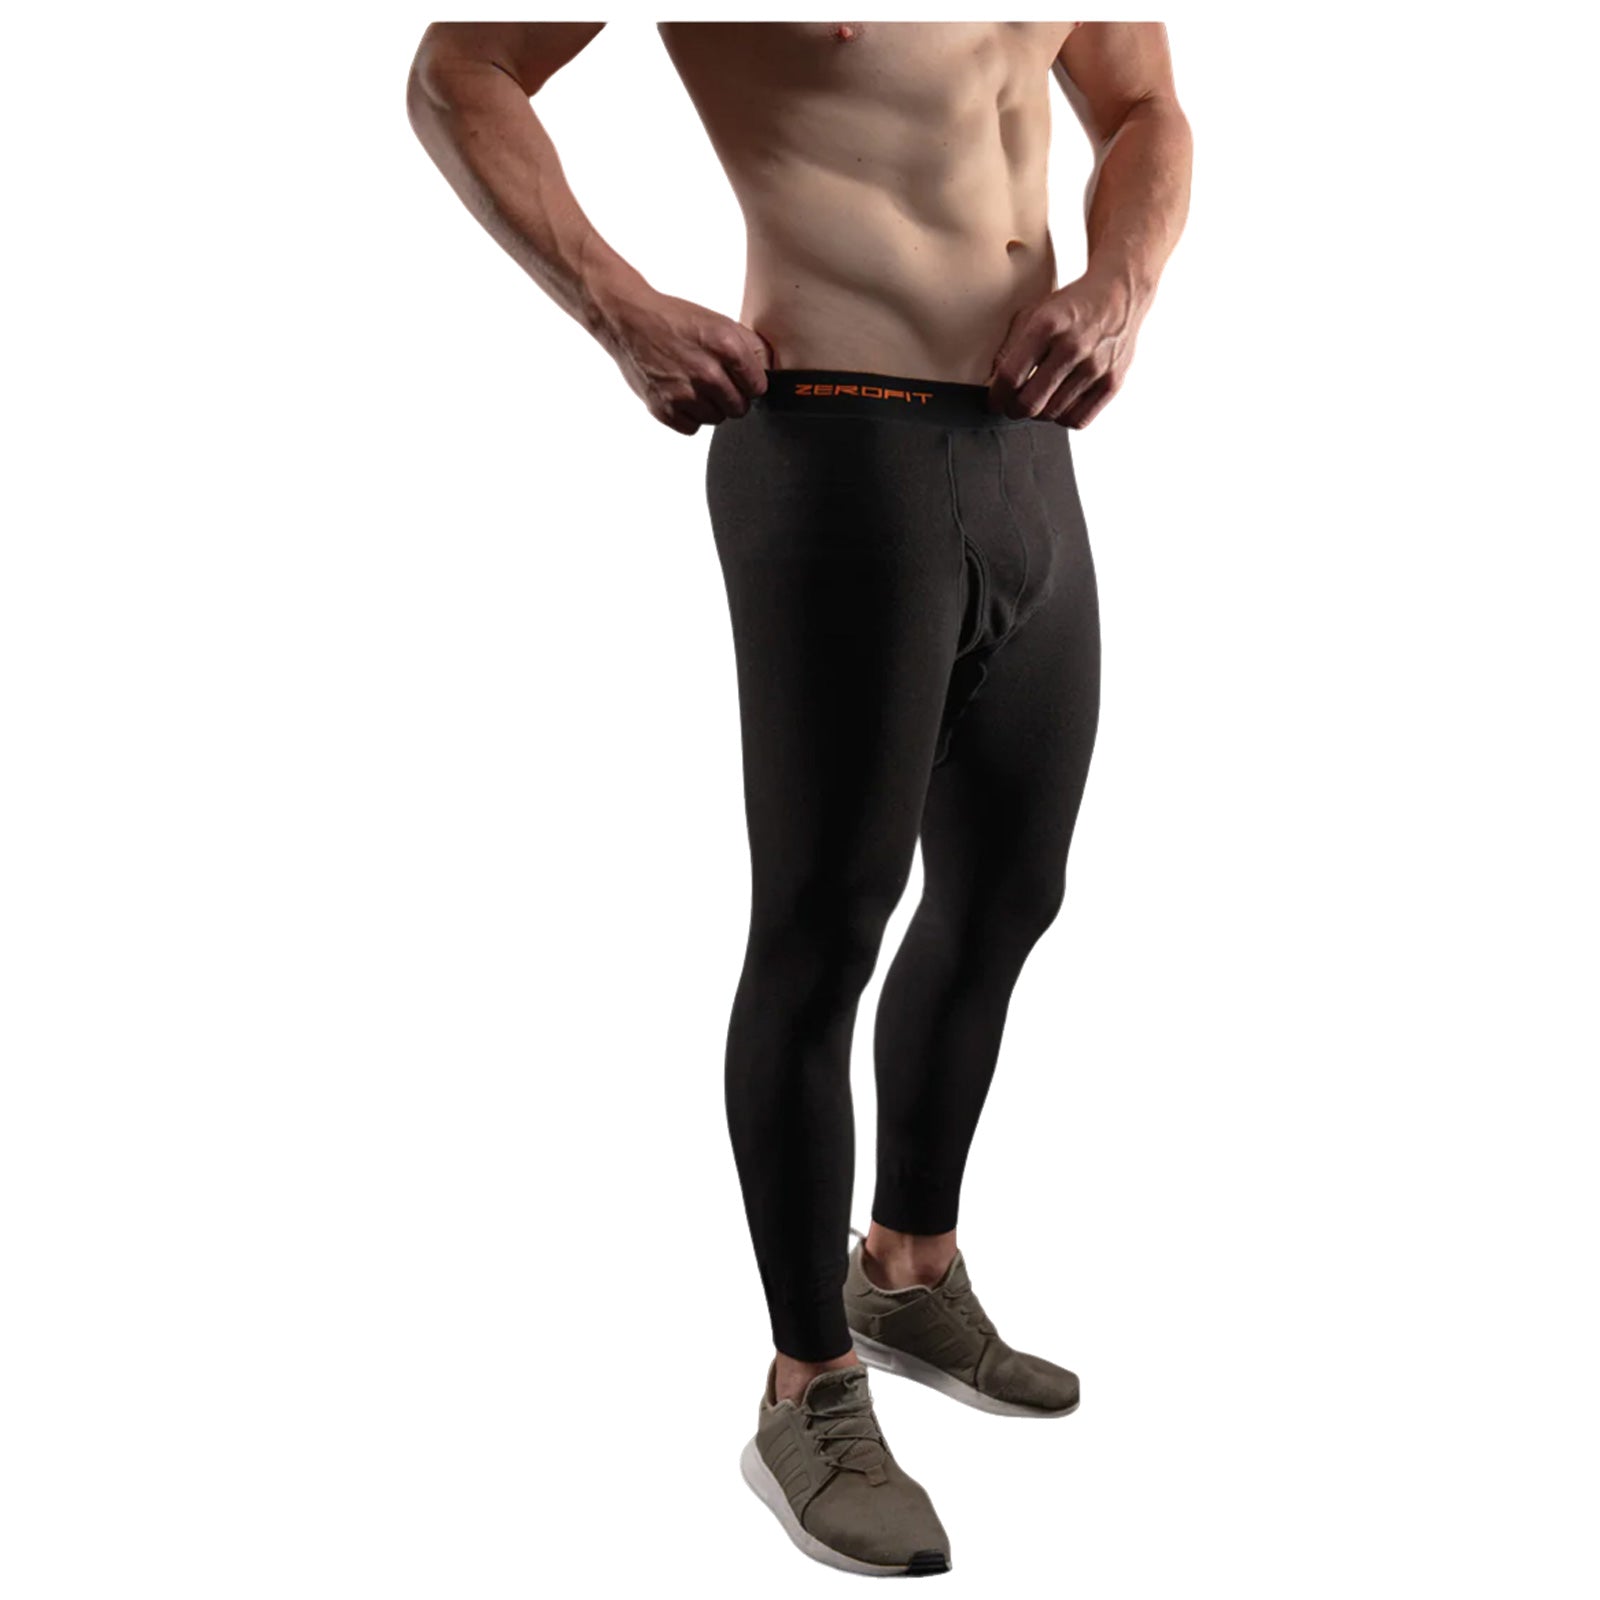 Craghoppers Mens Merino Tights Gym Leggings Base Layer Workout